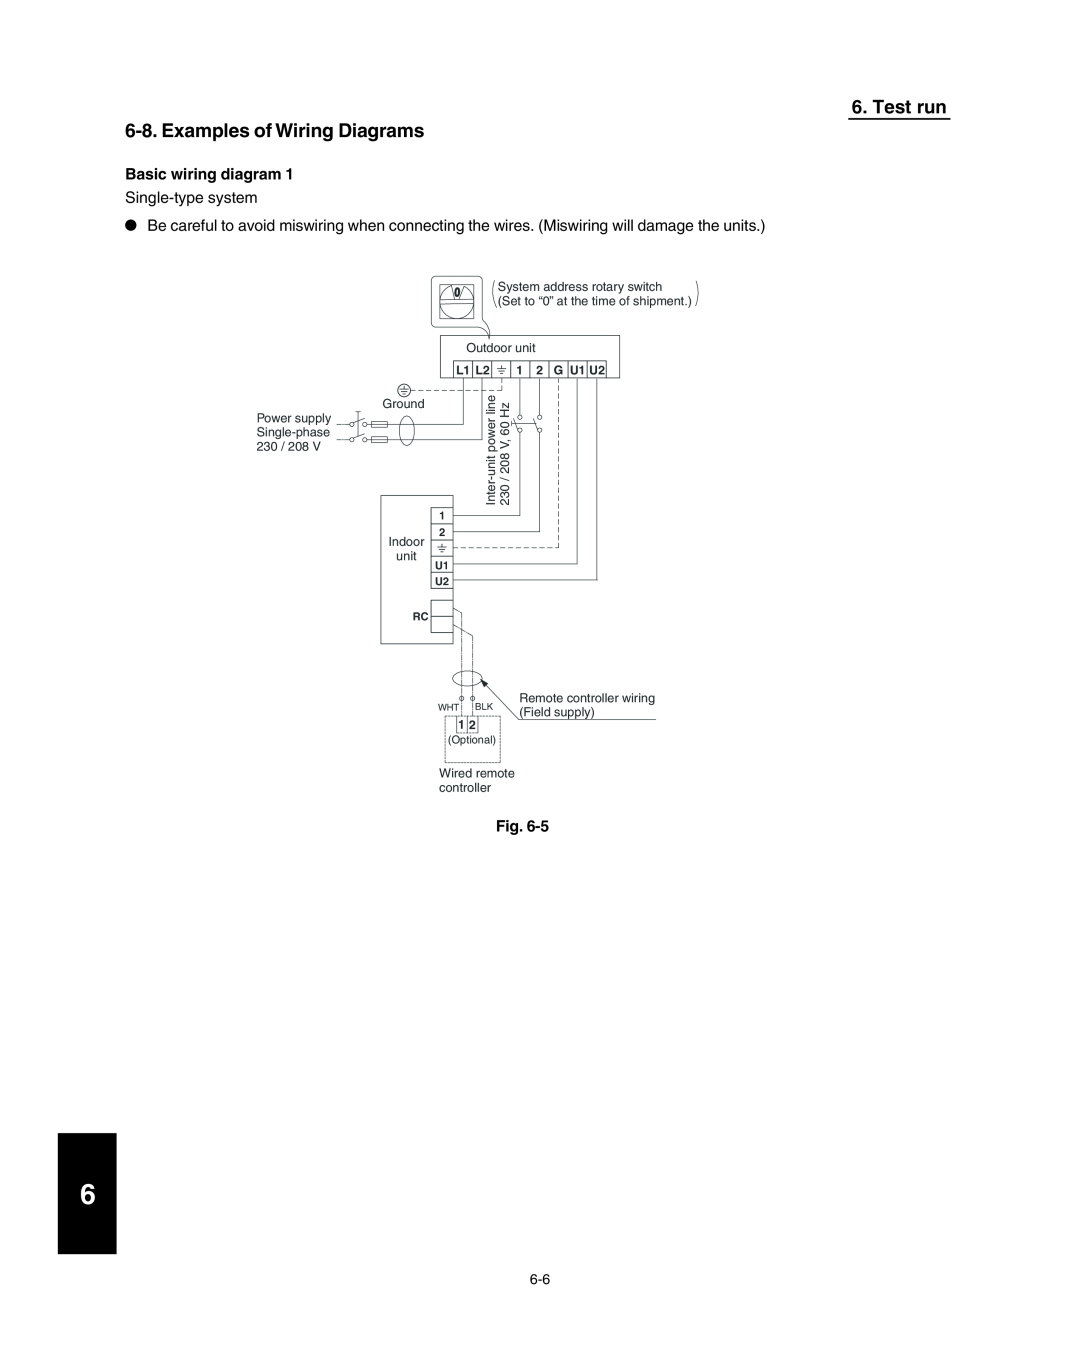 Panasonic R410A service manual Test run 6-8.Examples of Wiring Diagrams, Basic wiring diagram, Fig 